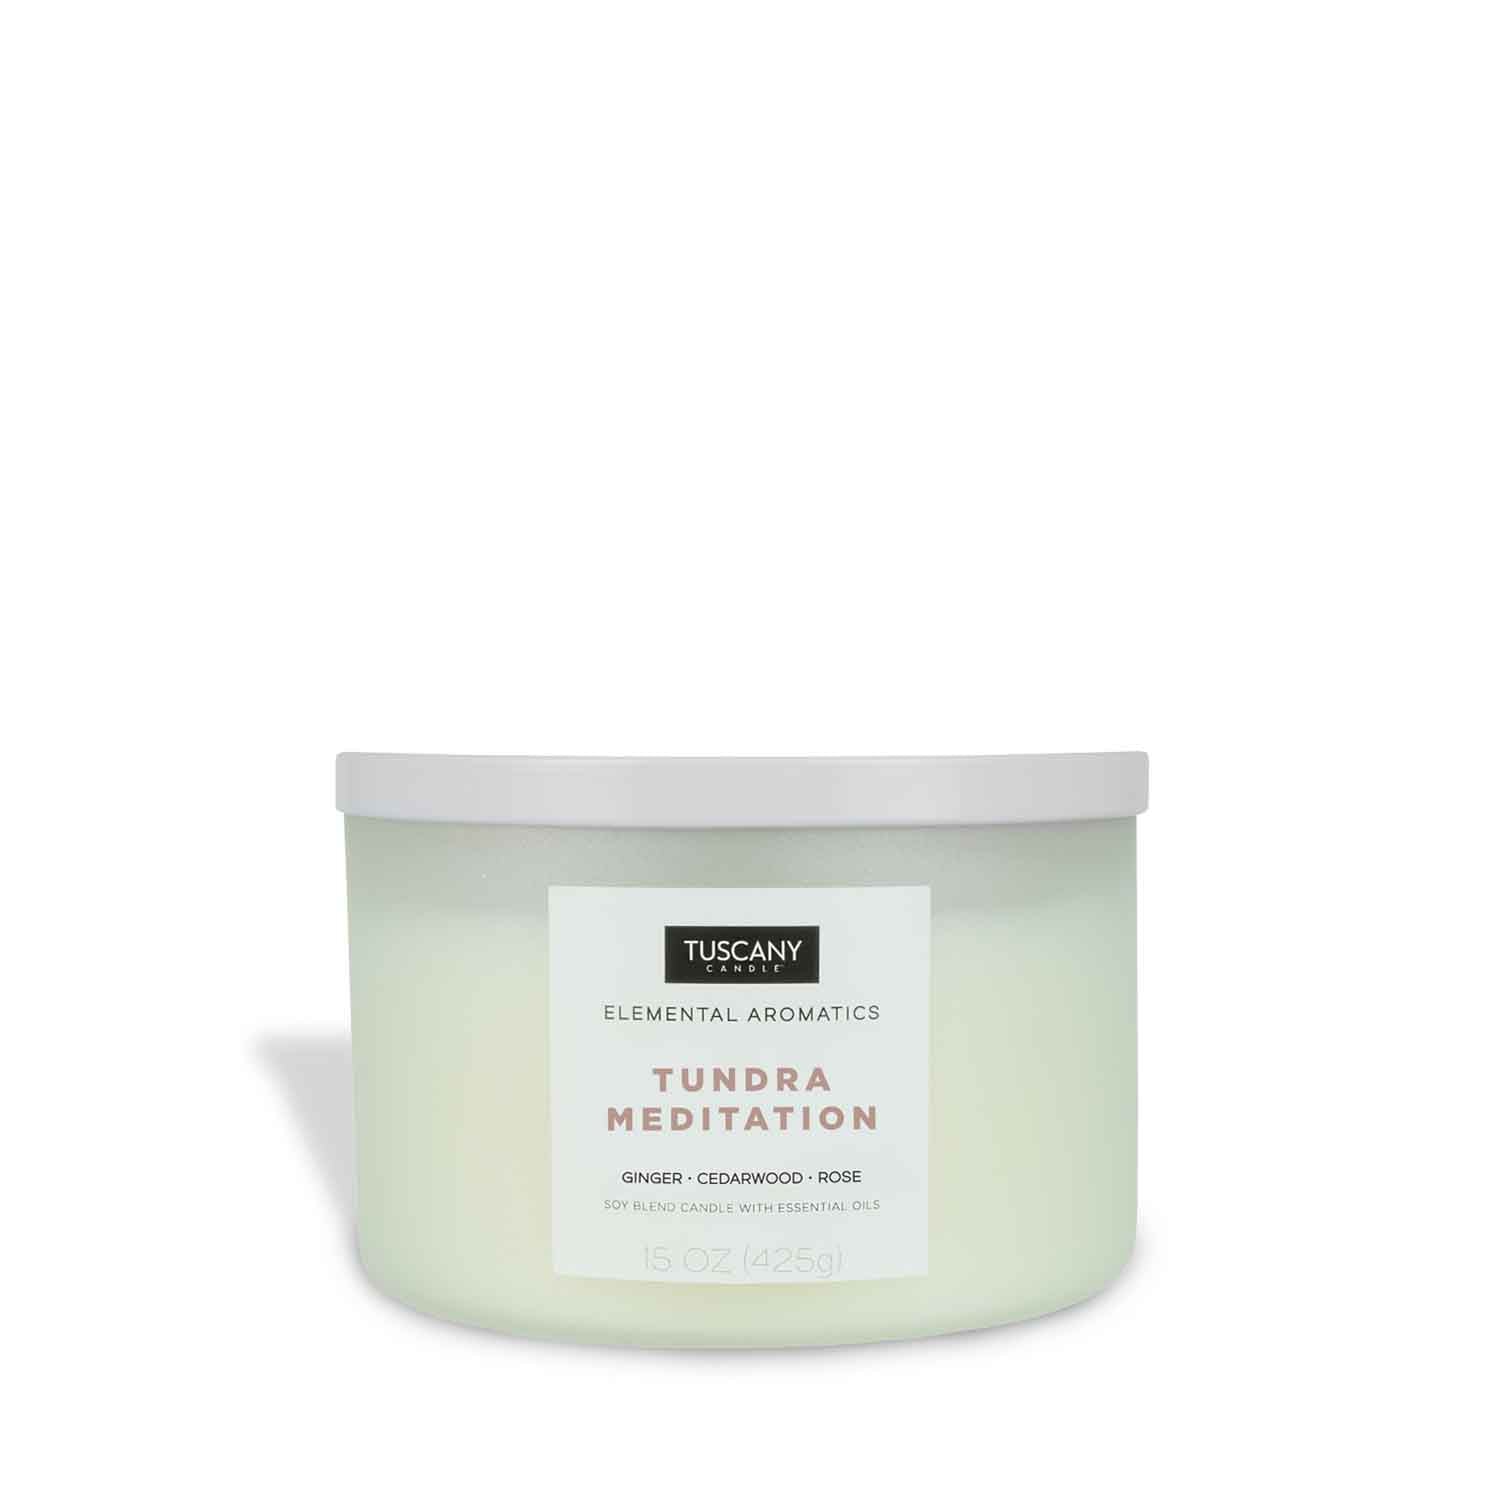 A Tuscany Candle Tundra Meditation Scented Jar Candle (15 oz) – Elemental Aromatics Collection on a white background.